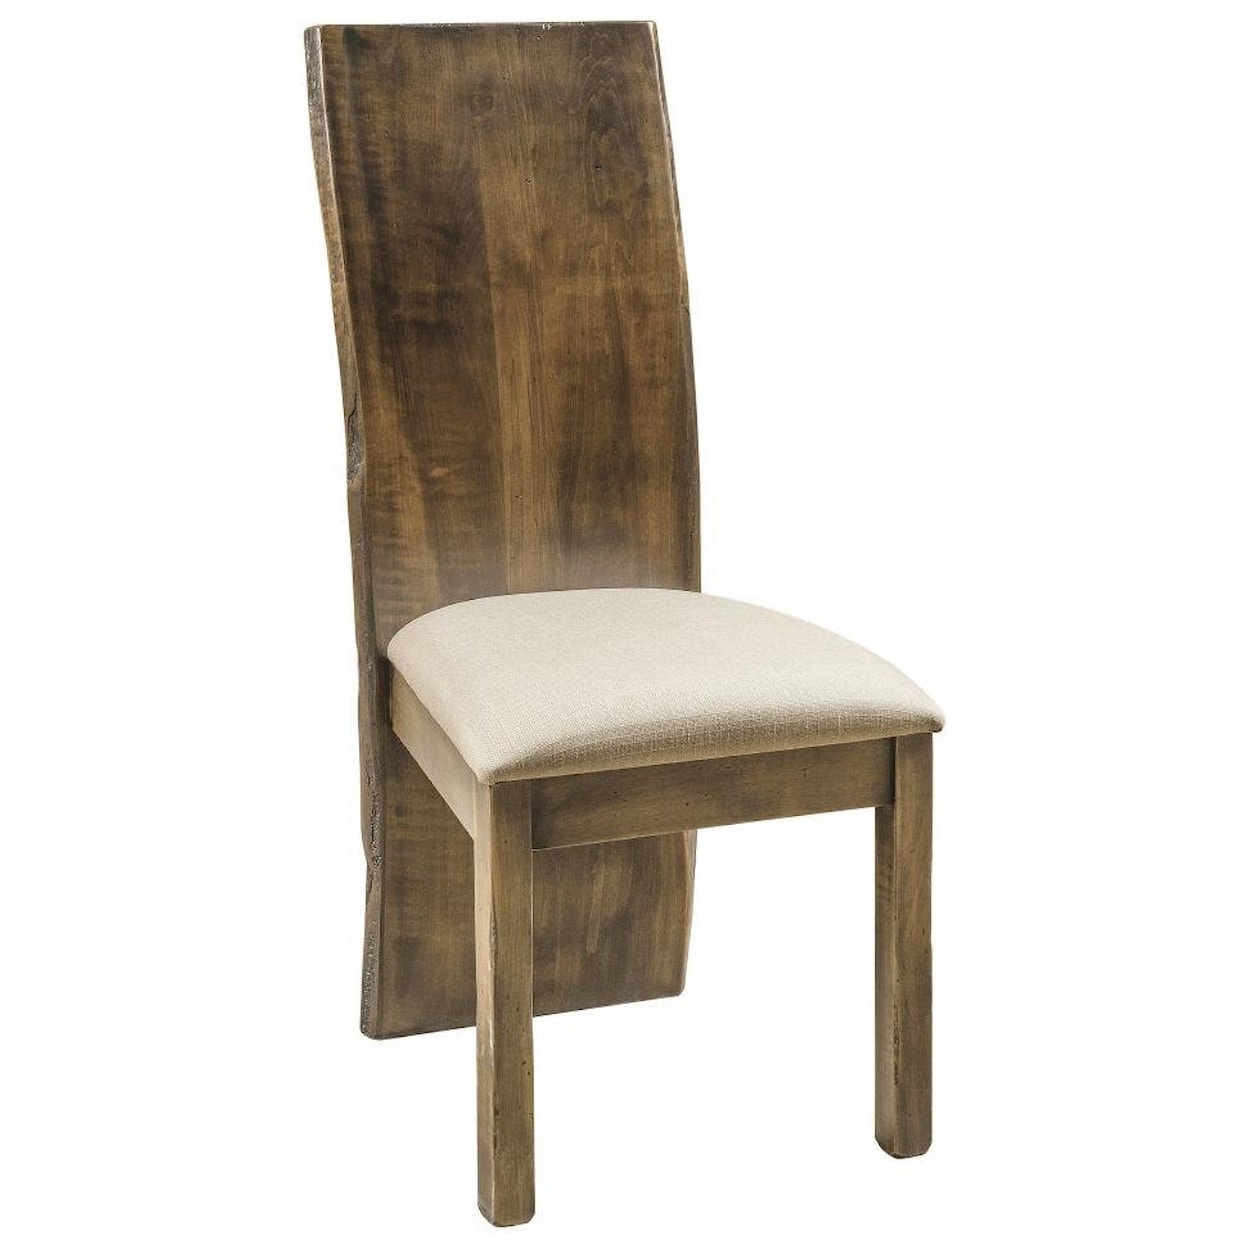 F&N Woodworking Evergreen Side Chair